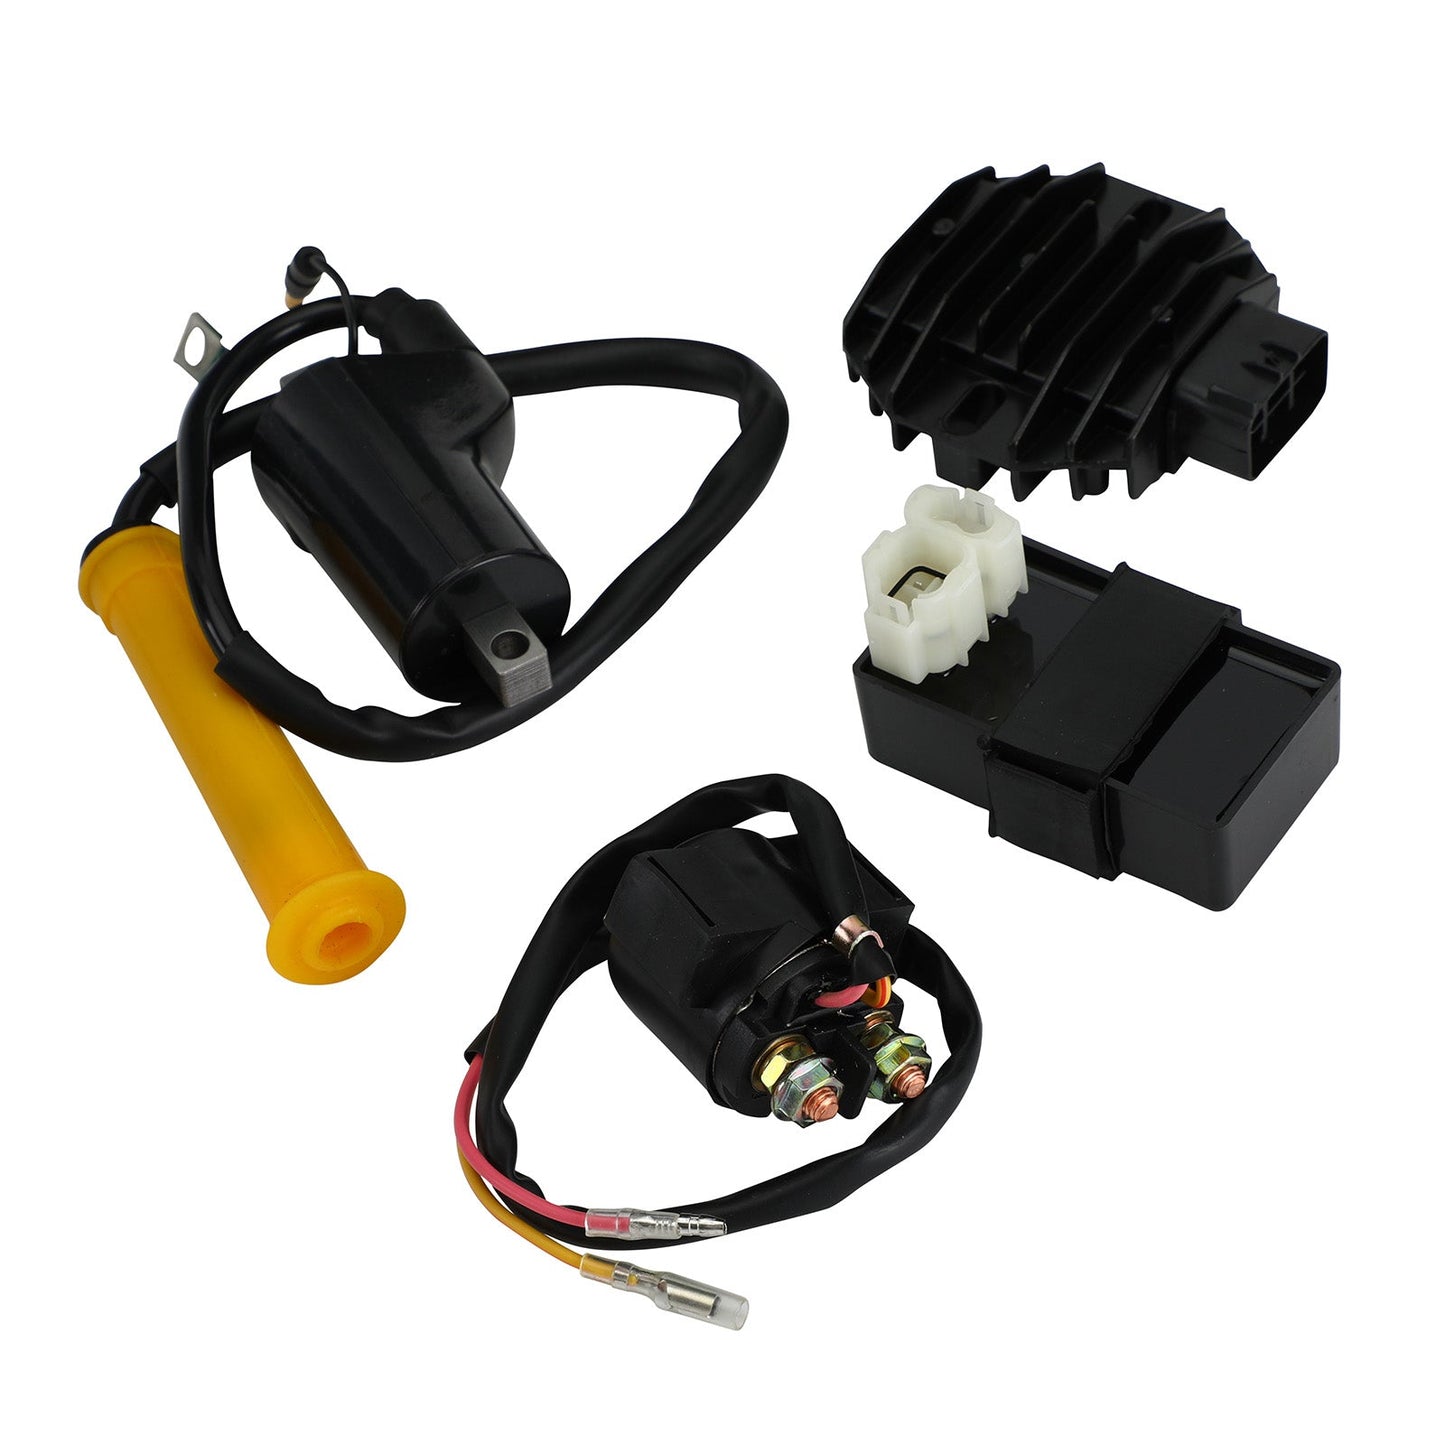 Spark Plug CDI Ignition Coil Starter Relay Rectifier for Honda Sportrax TRX400EX